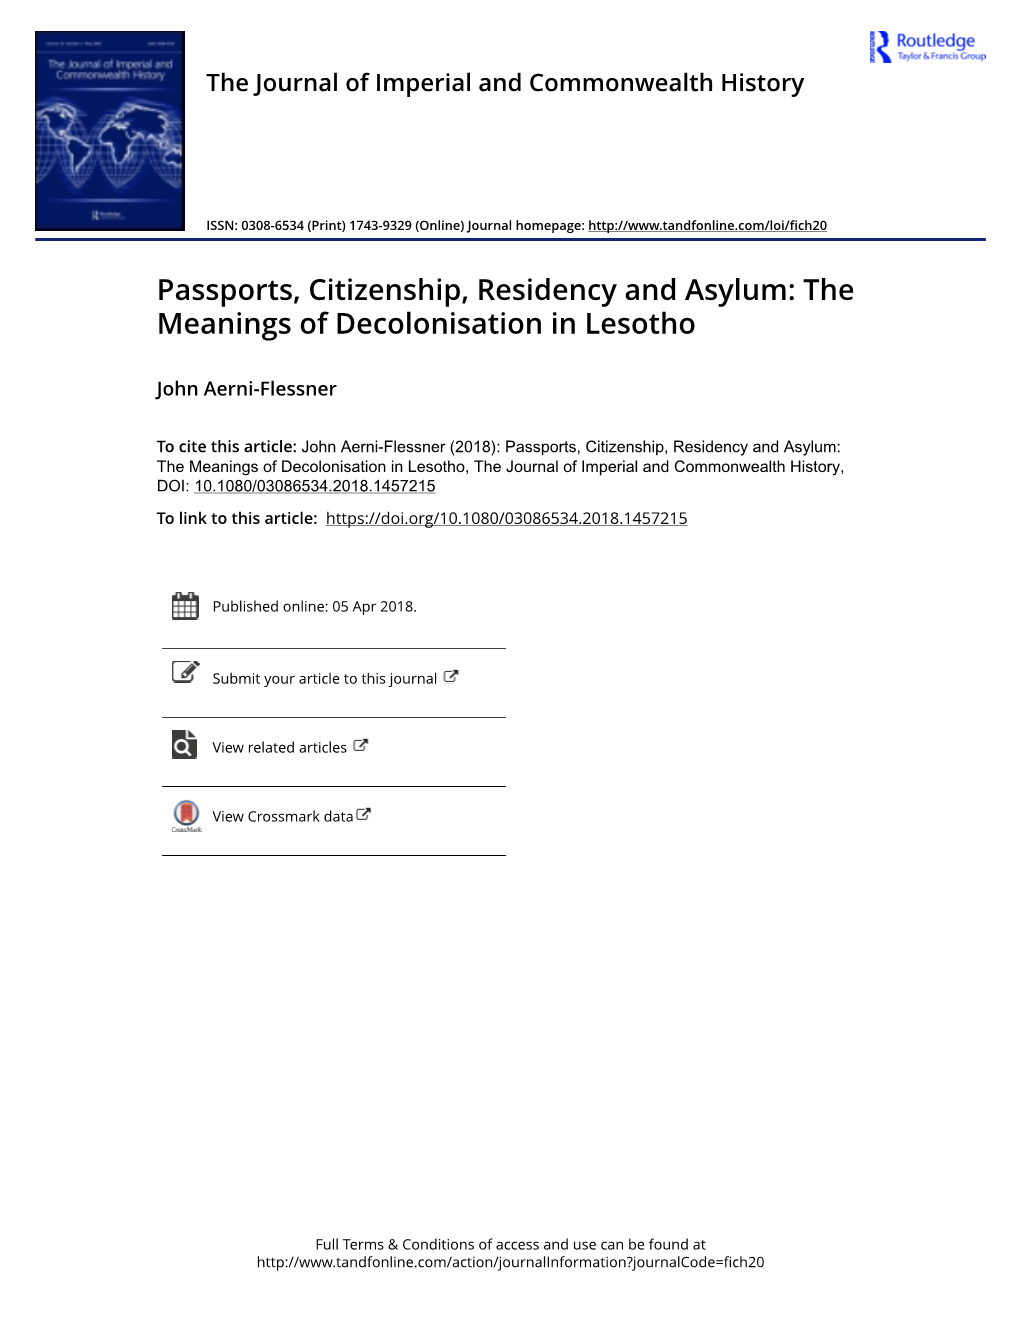 Passports, Citizenship, Residency and Asylum: the Meanings of Decolonisation in Lesotho